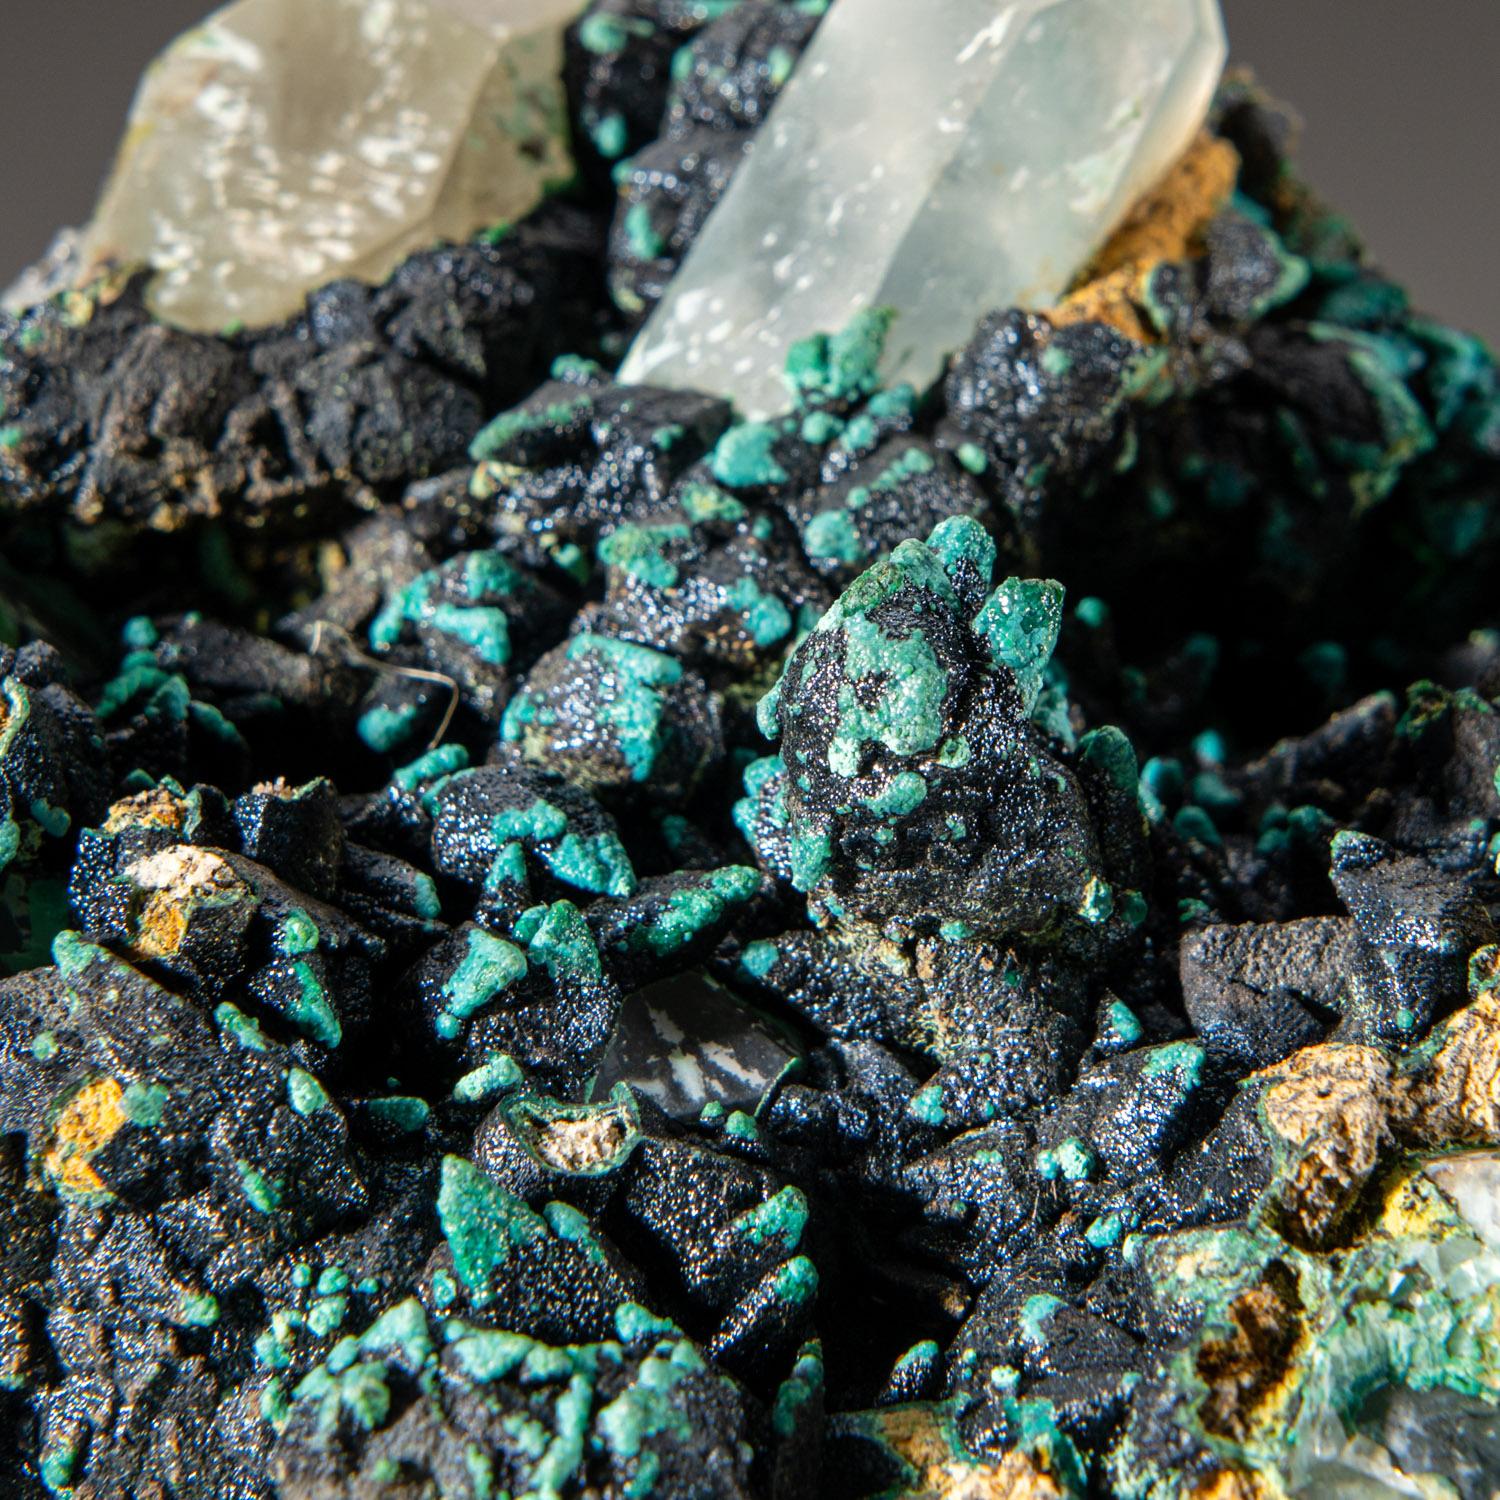 Crystal Chrysocolla over Quartz from Ray Mine, Mineral Creek District, Pinal County, Ari For Sale